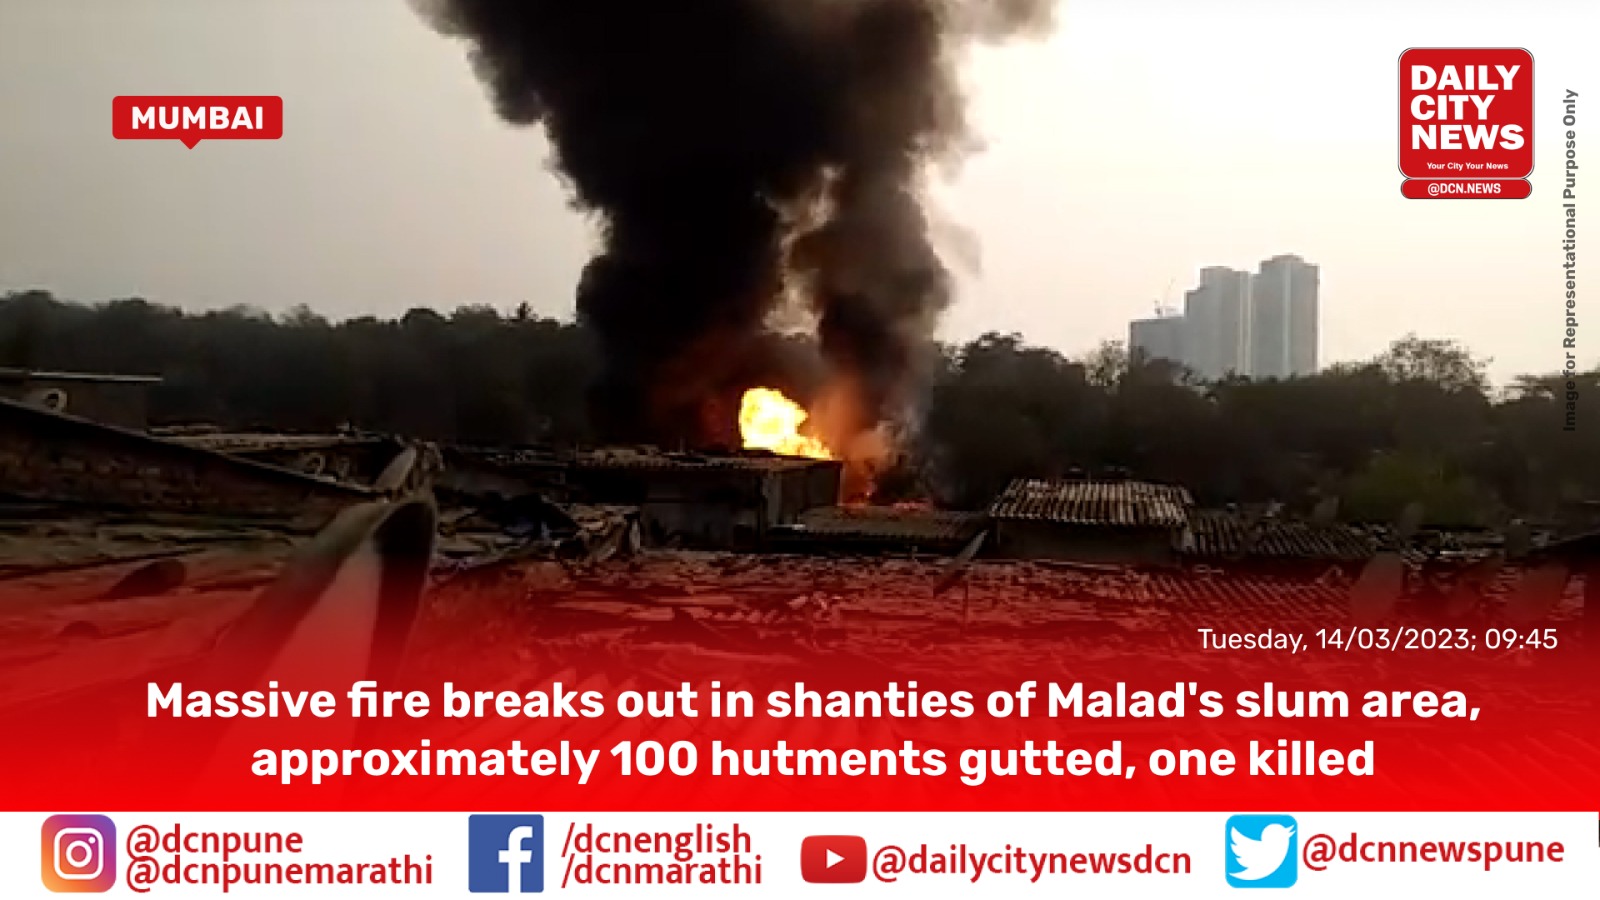 Massive fire breaks out in shanties of Malad's slum area, approximately 100 hutments gutted, one killed